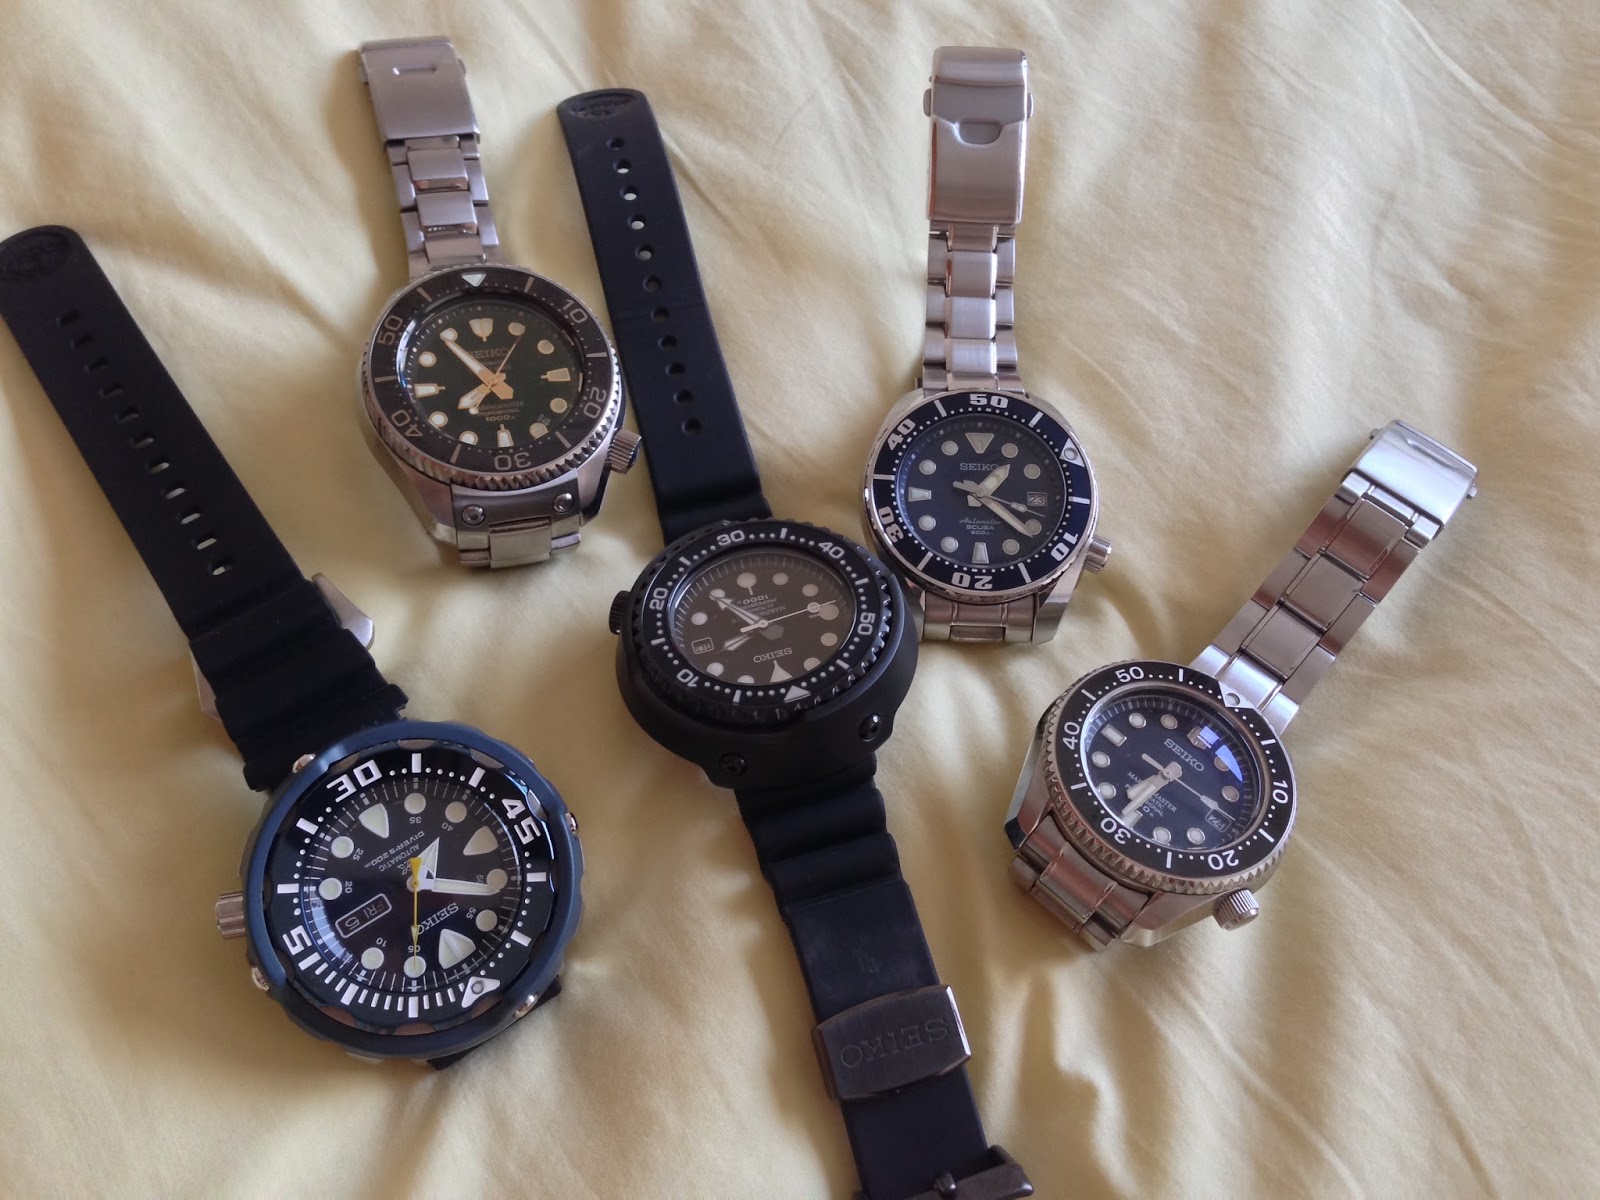 My Eastern Watch Collection: Comparison between various Seiko Prospex  divers - Thickness, wearing comfort, etc.